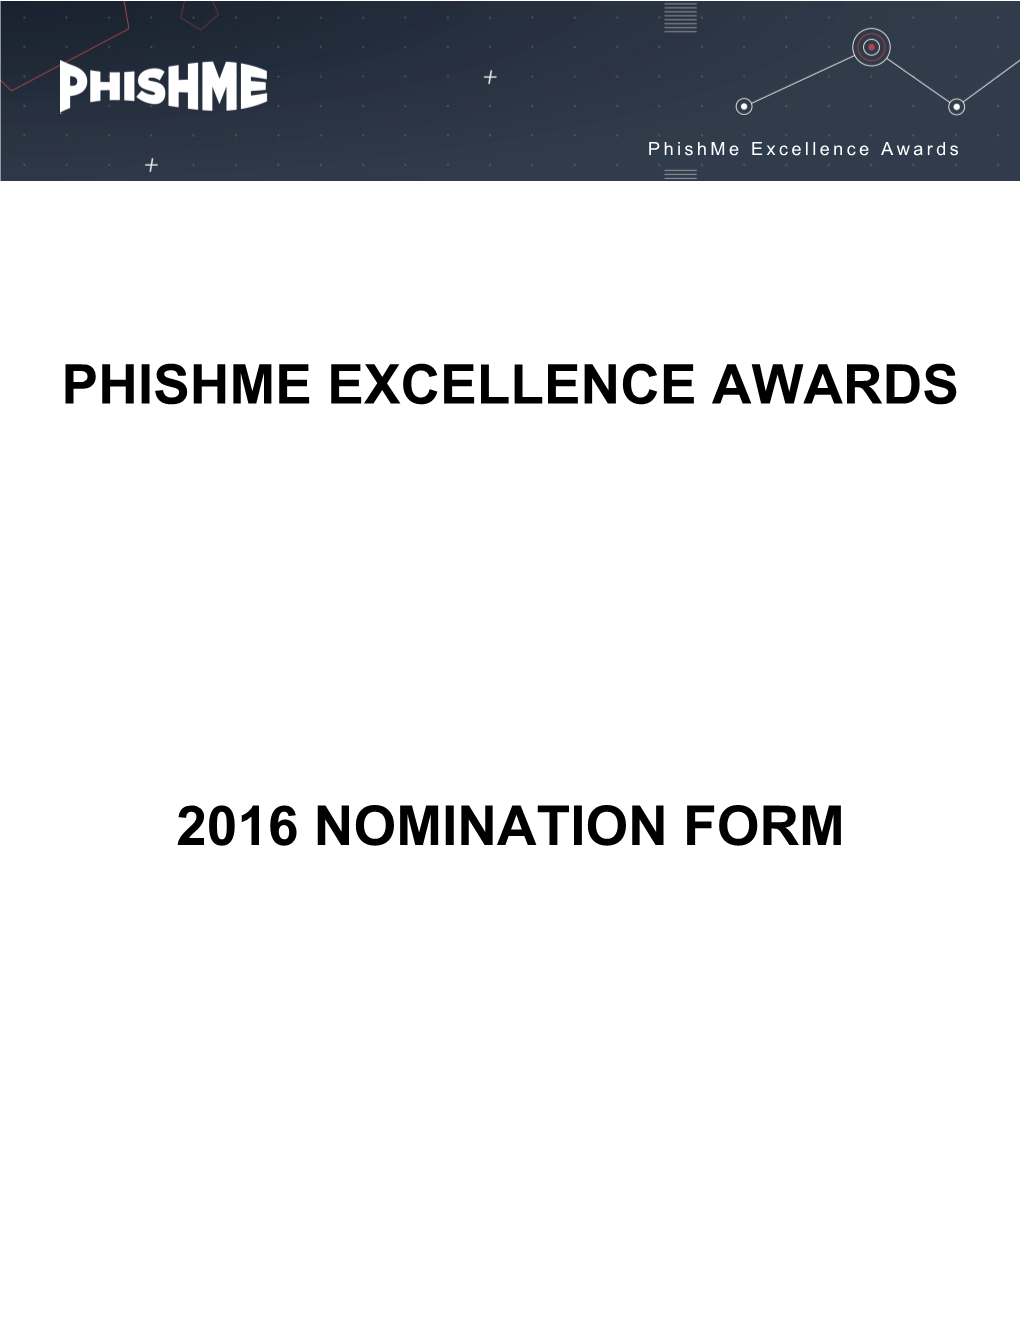 Phishme Excellence Awards